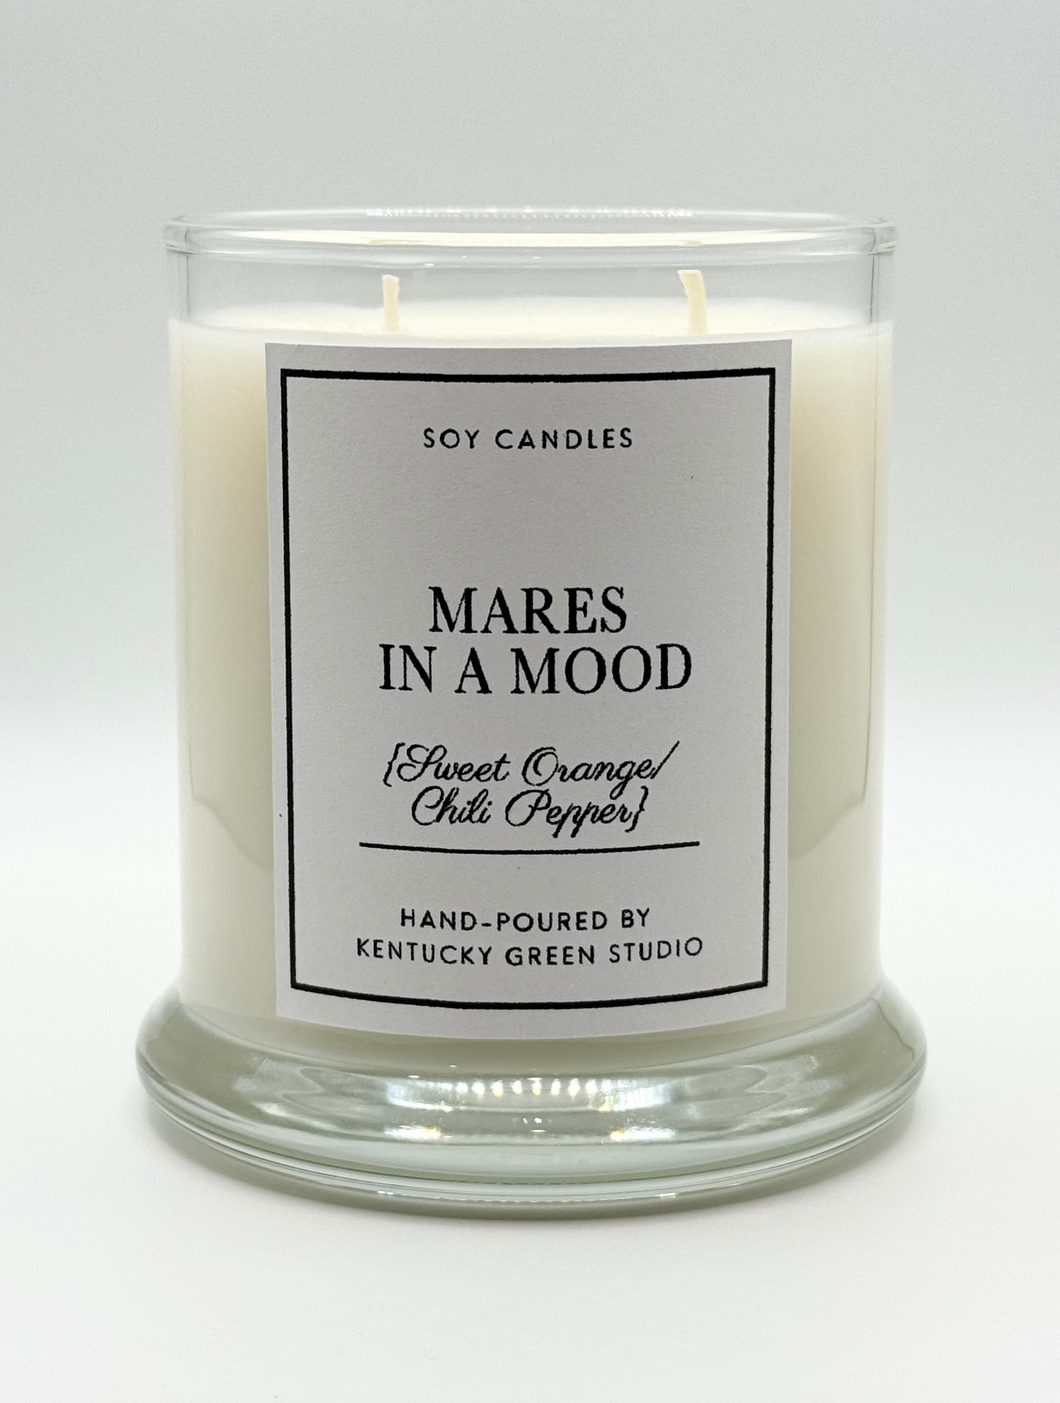 Mares in a Mood Soy Wax Candle